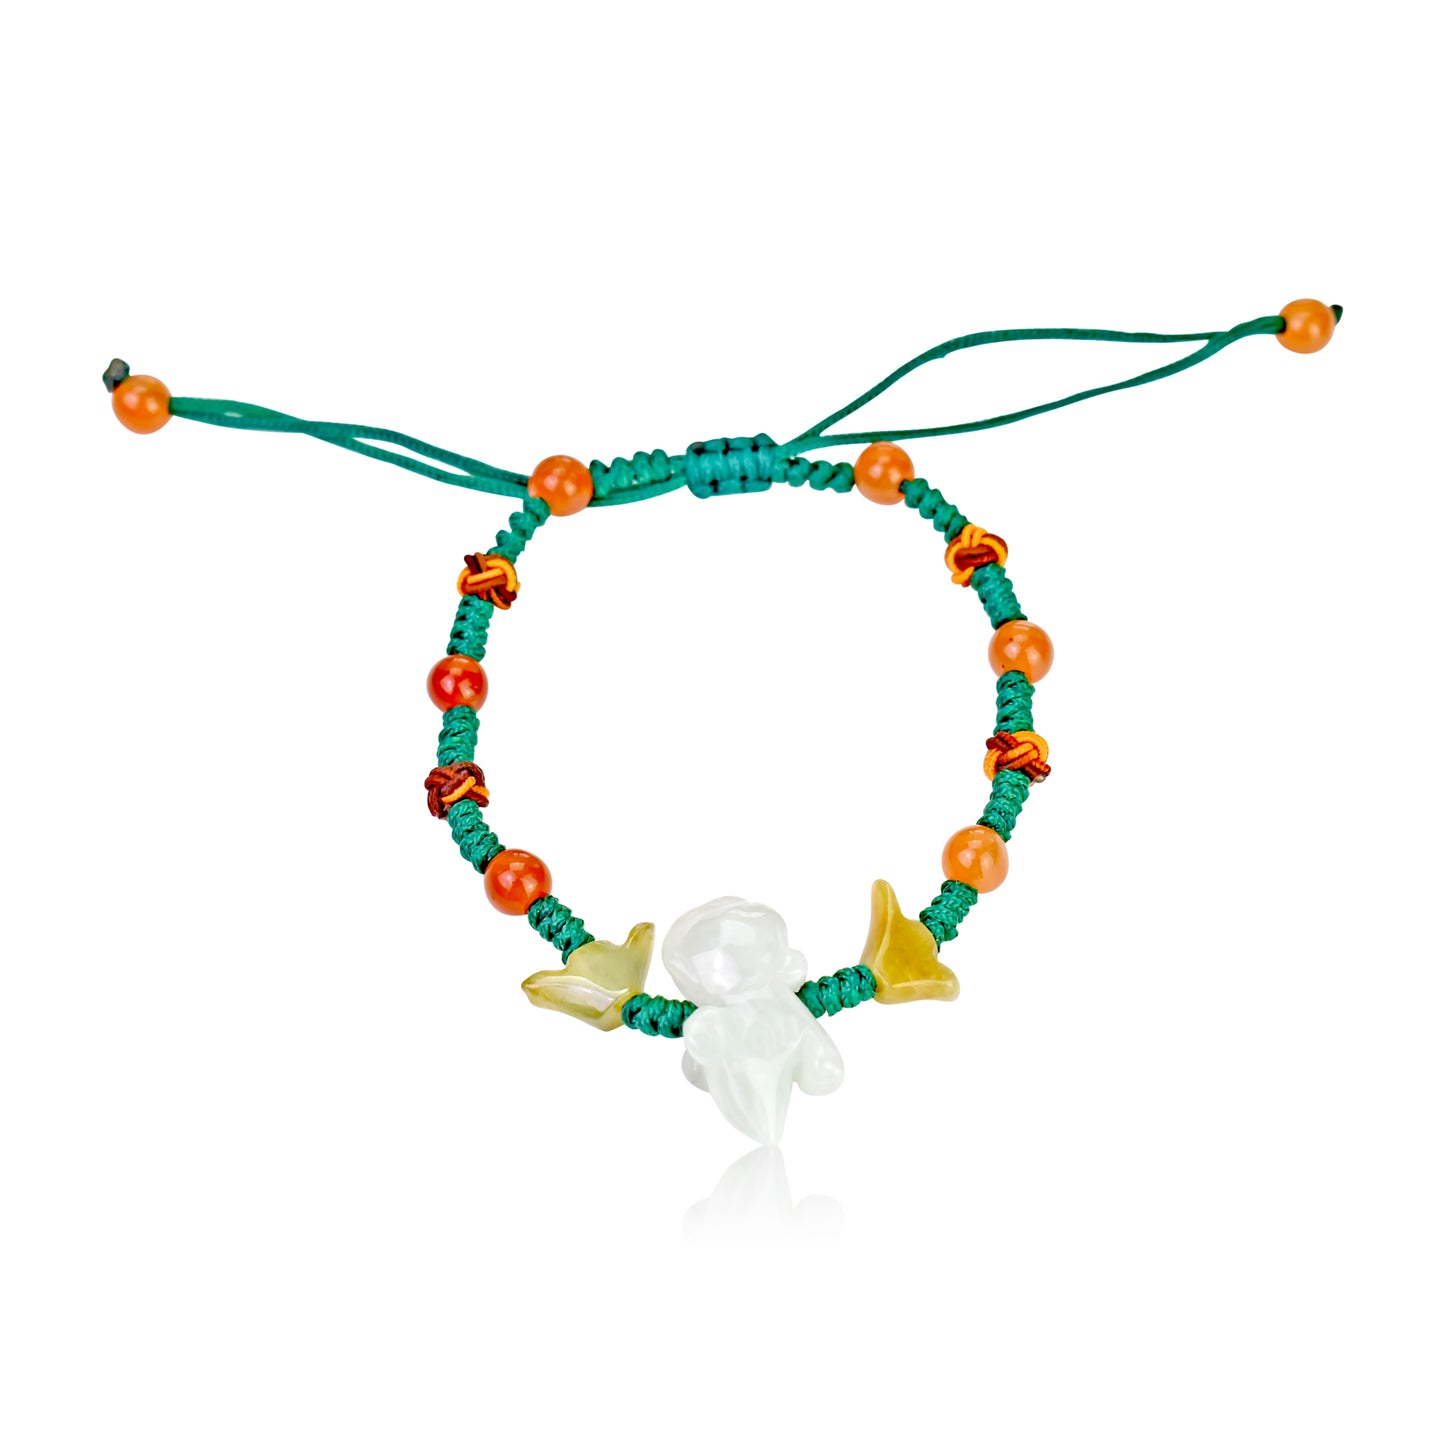 Become Ambitious with a Rat Symbolized Jade Bracelet made with Green Cord